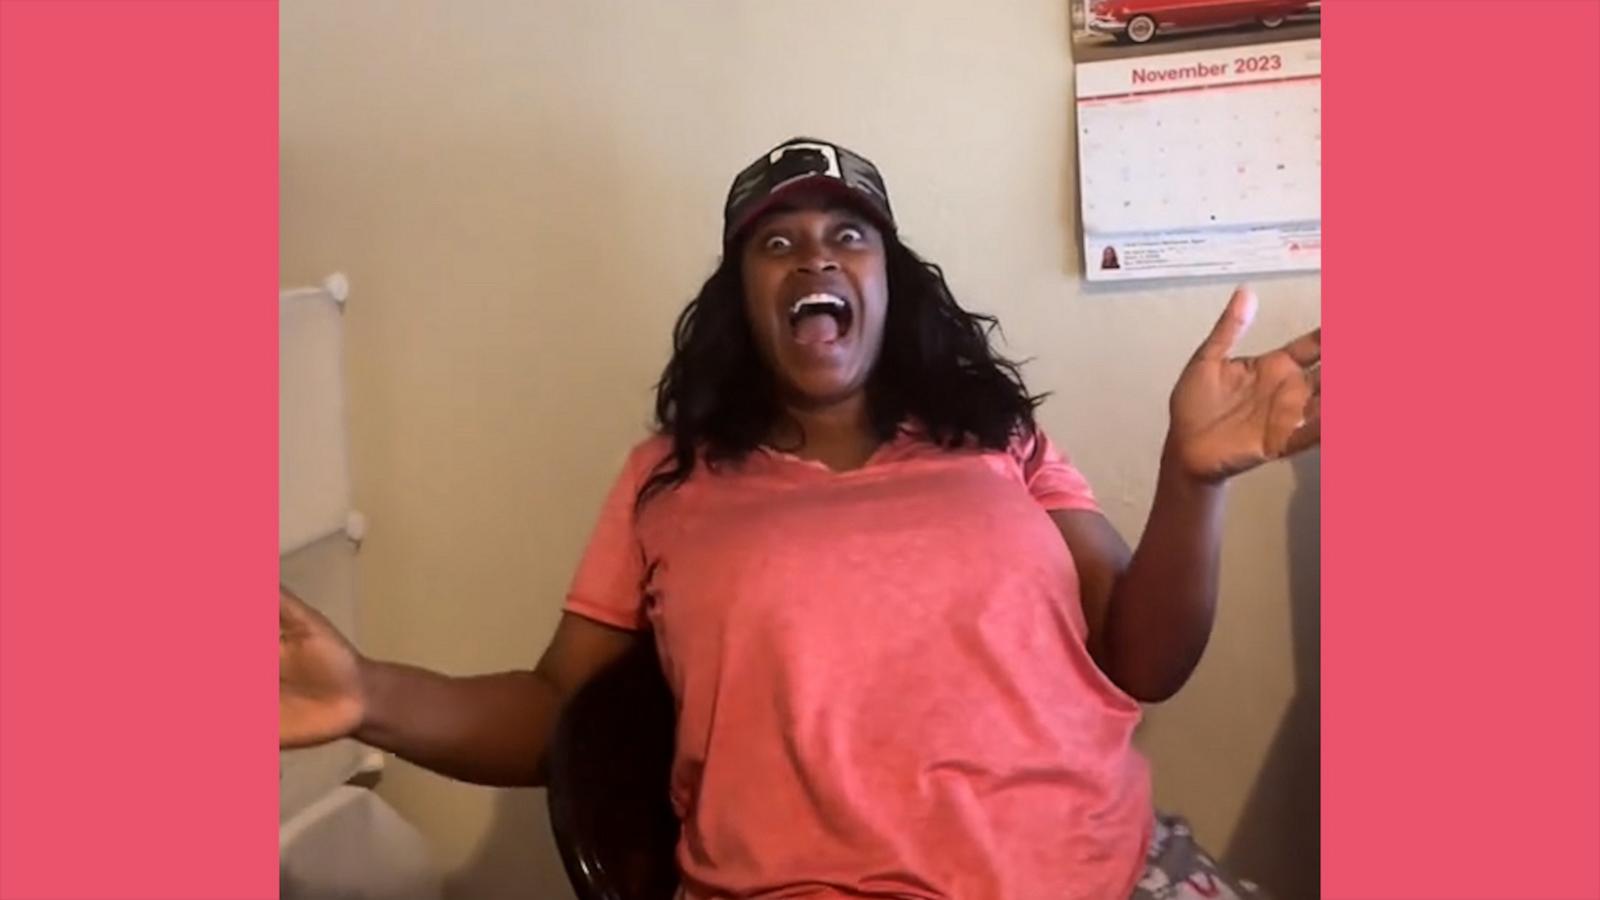 VIDEO: Mom has hilarious reaction after daughter surprises her for Thanksgiving